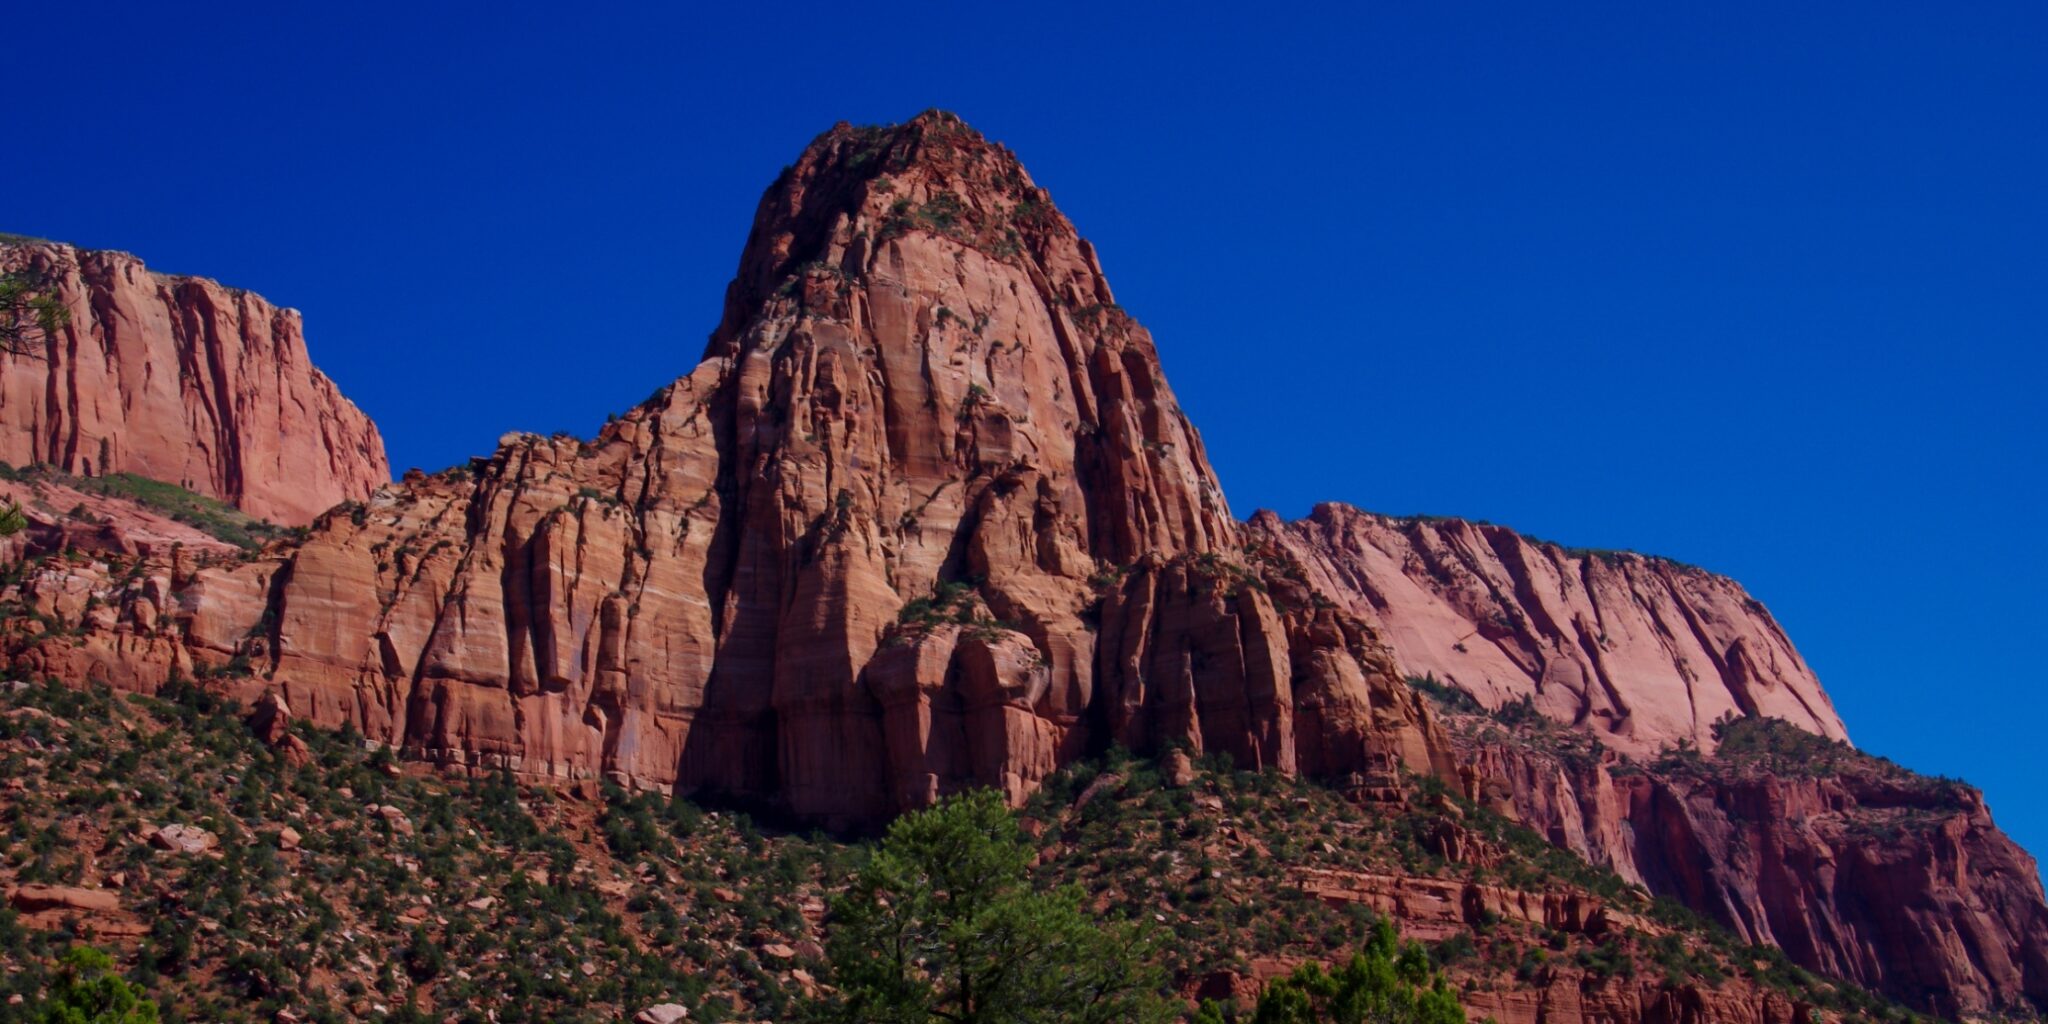 Giant Escutcheon Shaped Rock In Kolob Canyon Section Of Zion National Park, UT